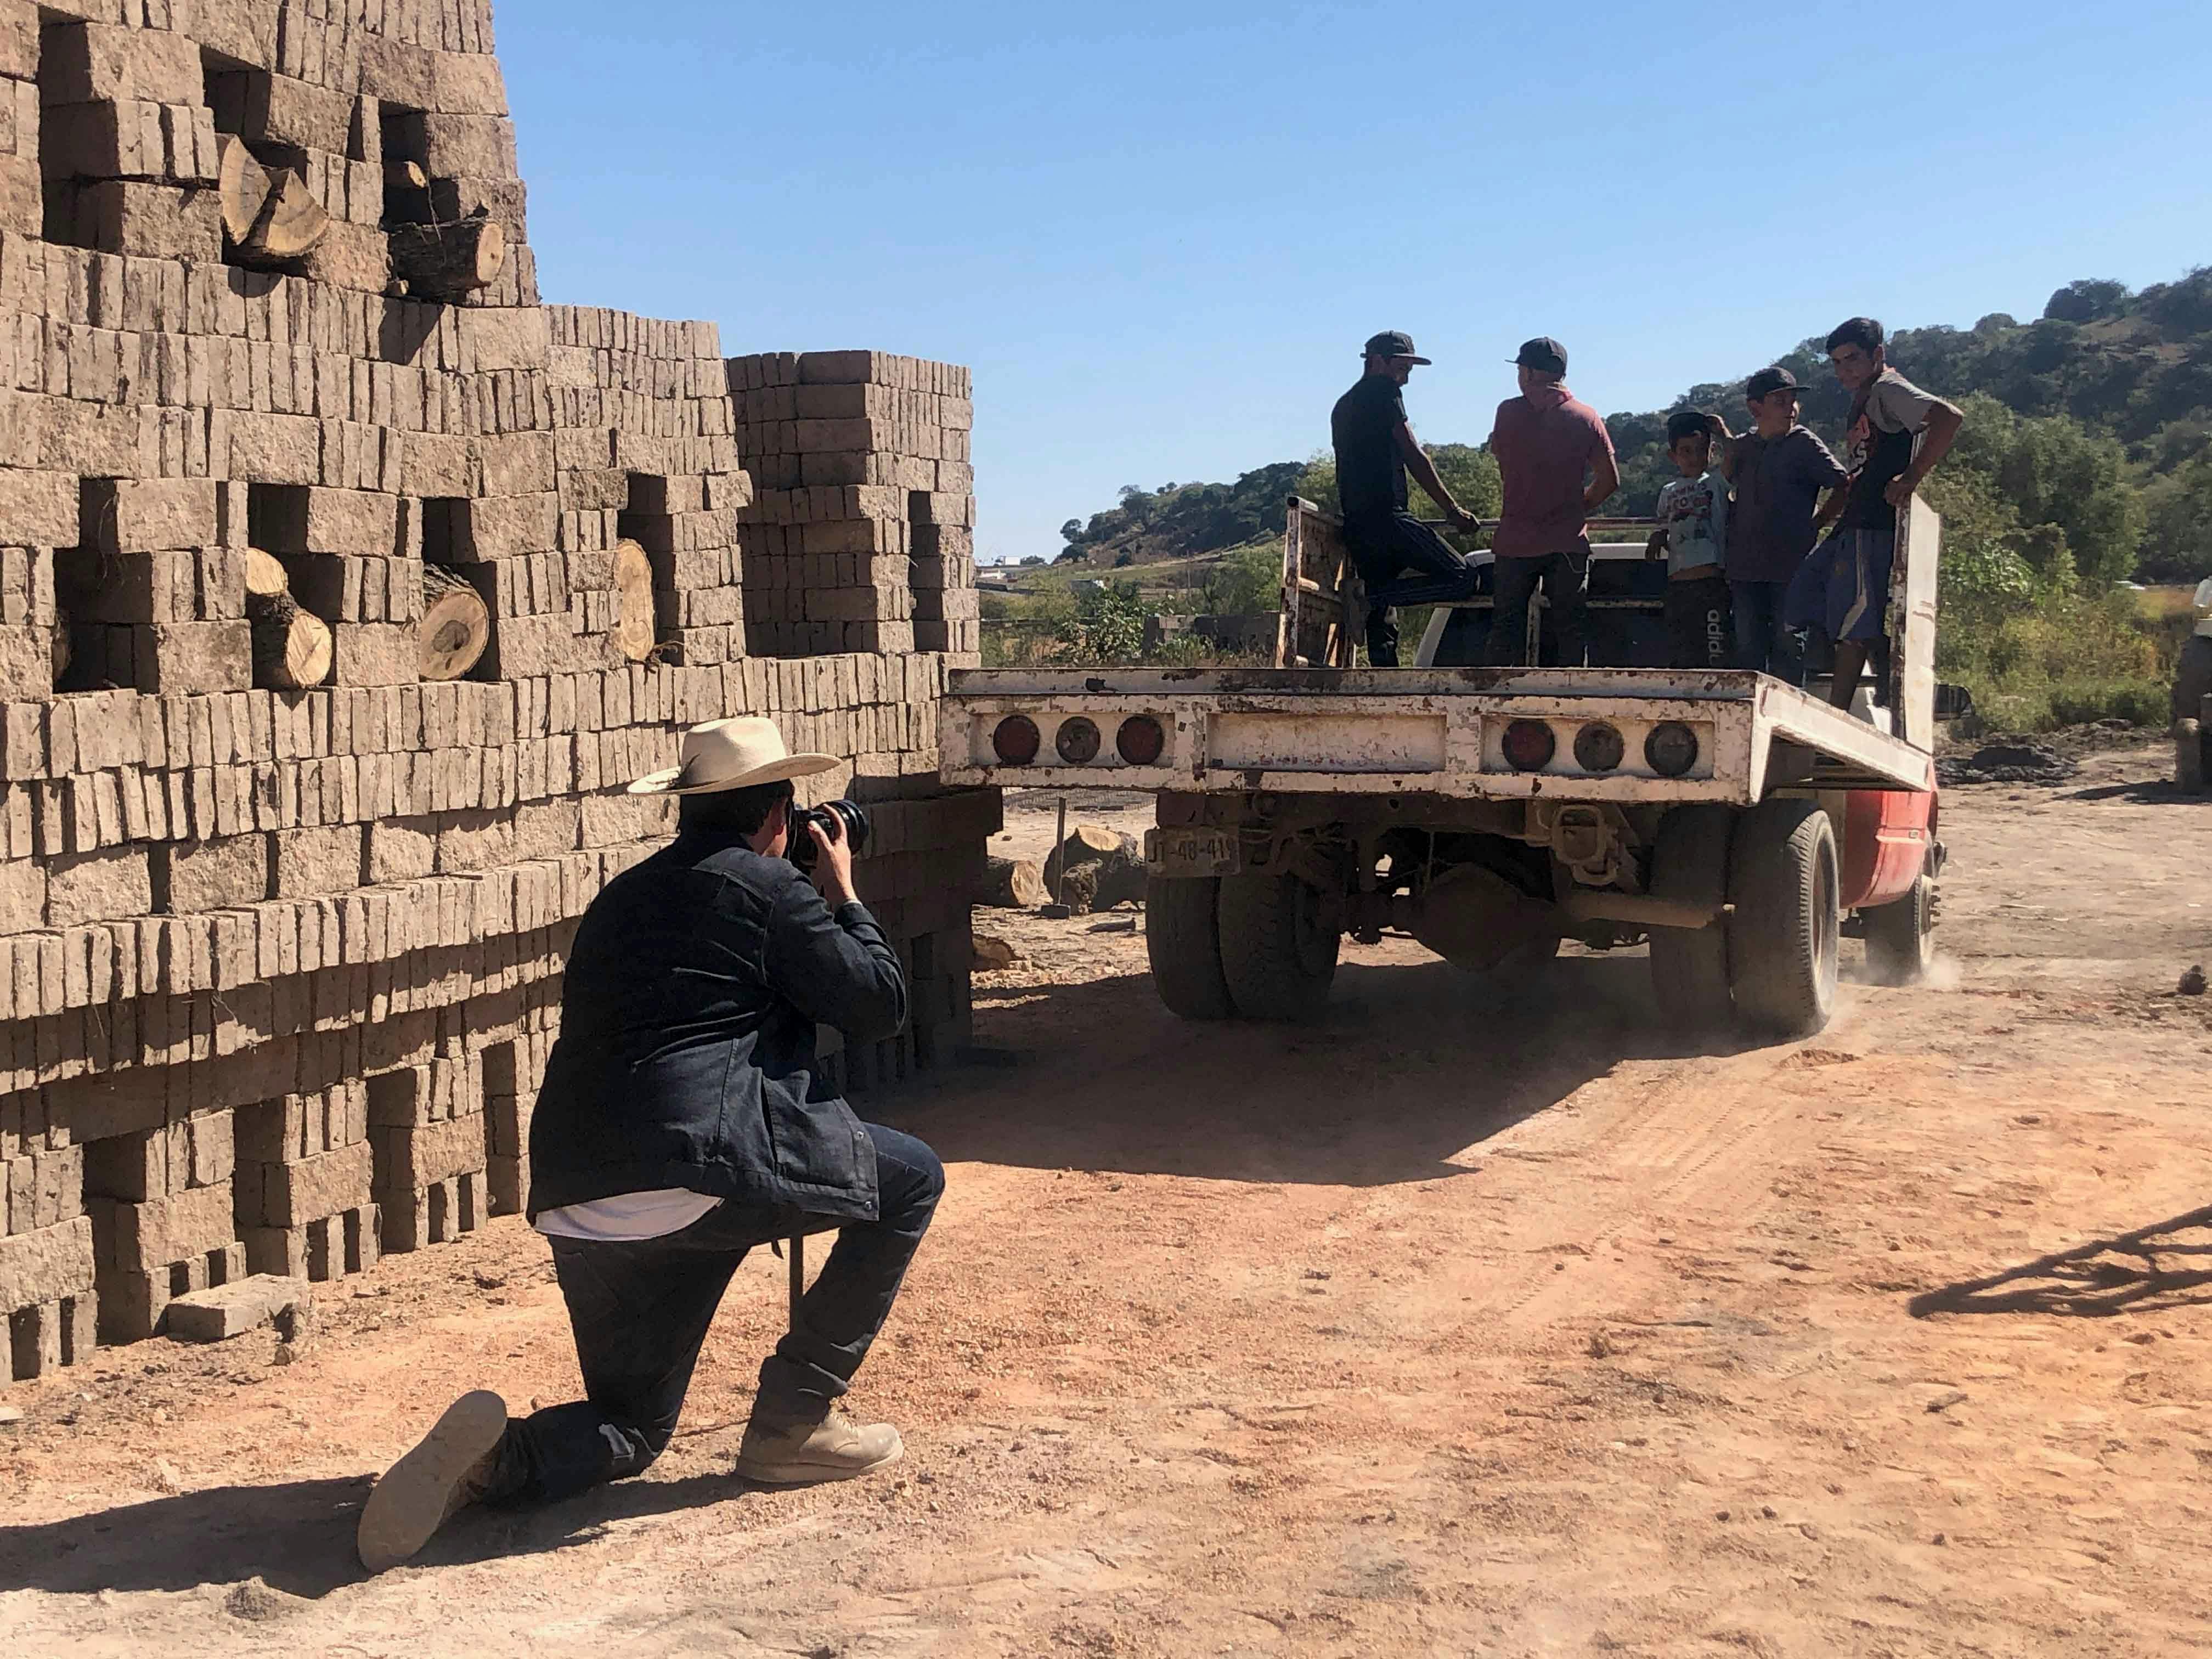 Almanza Pereda photographing the kiln assembly crew in Magdalena.